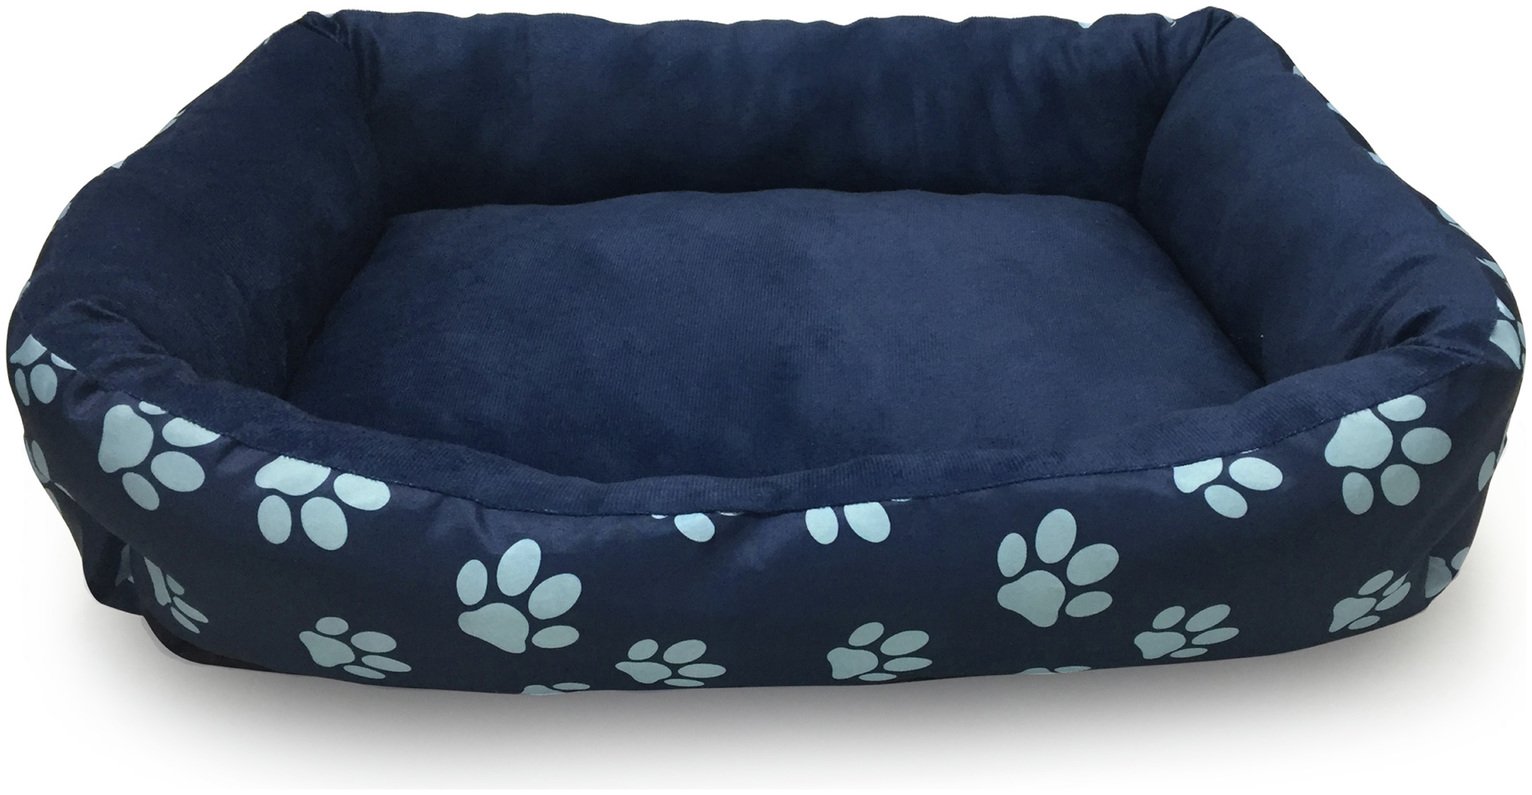 Paw Print Square Navy Pet Bed - Large